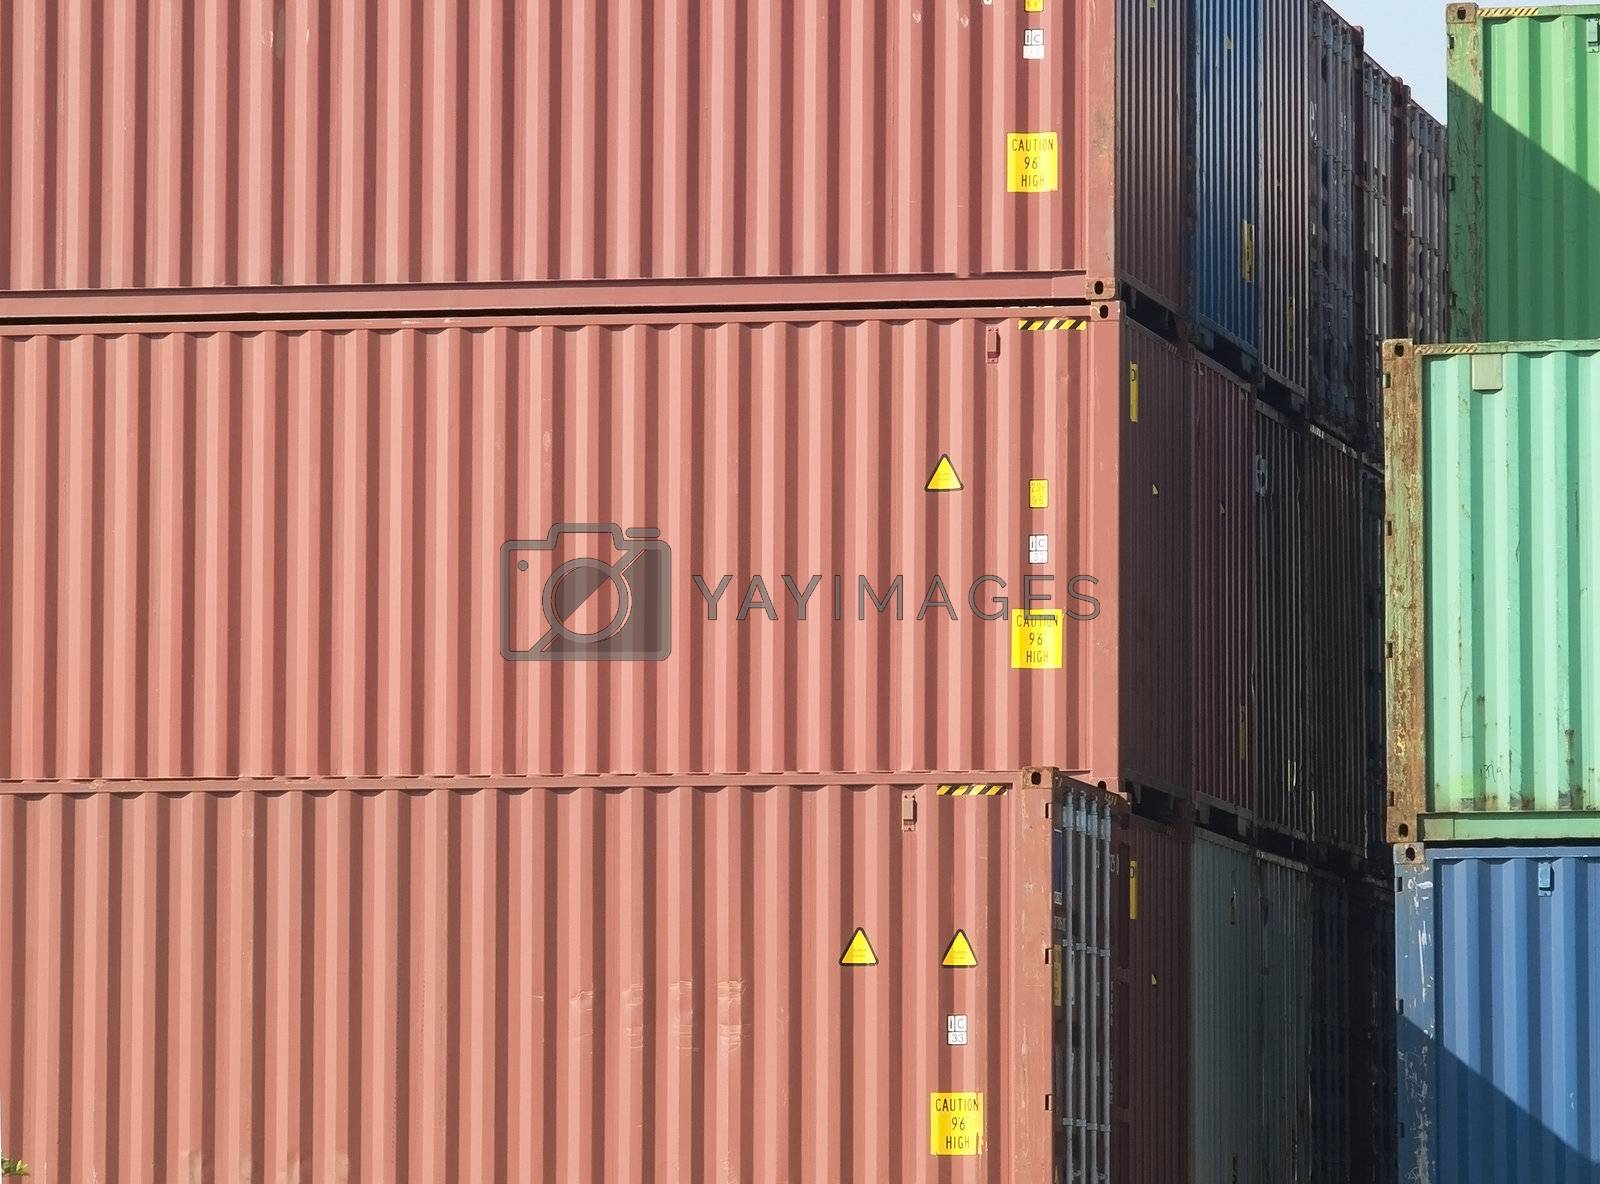 Royalty free image of Freight containers by epixx